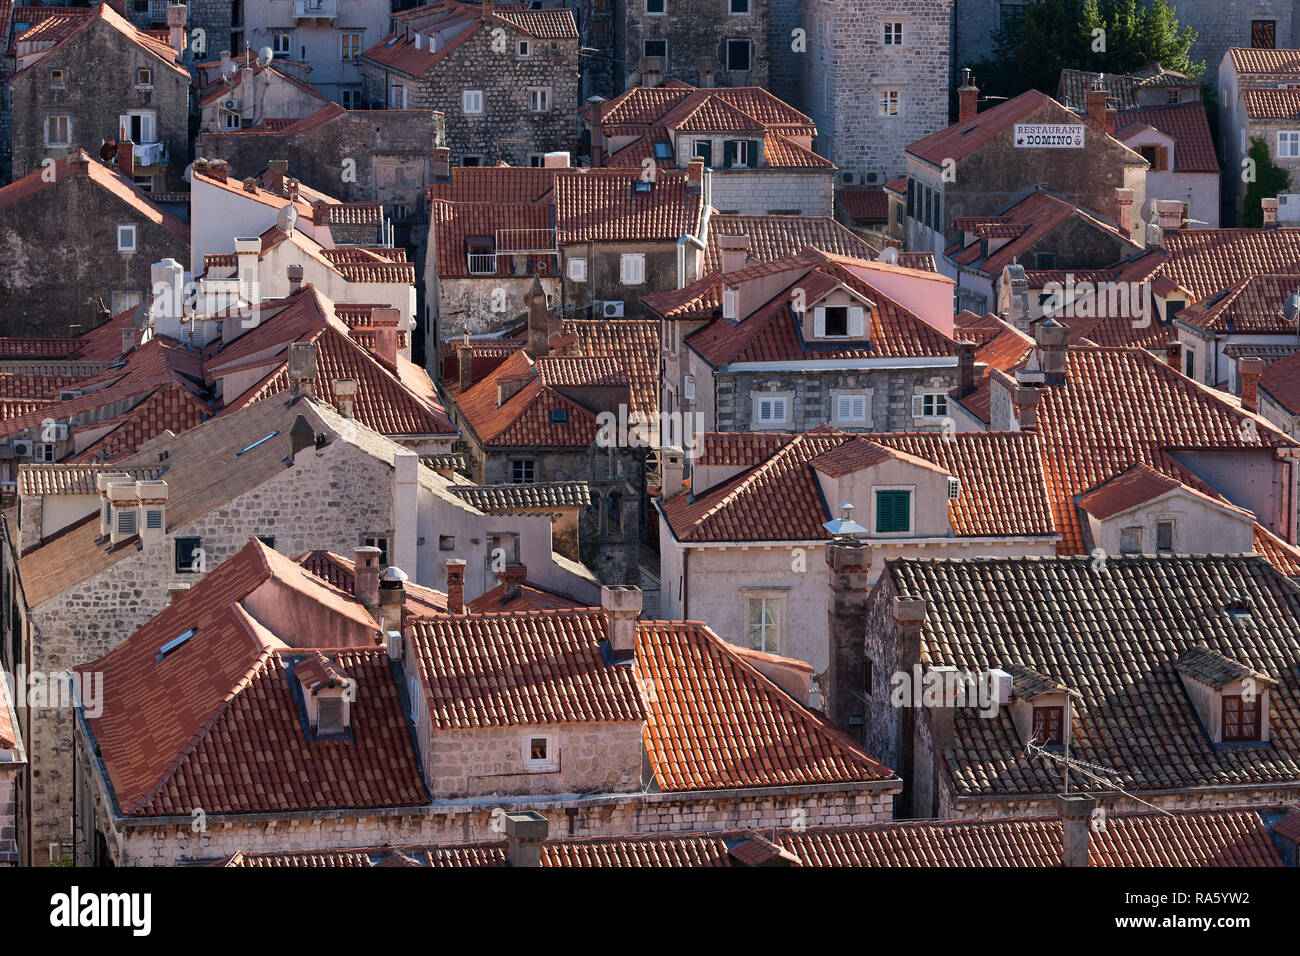 The iconic red roofs as far as the eye can see above the walled city of Dubrovnik, Croatia. Stock Photo